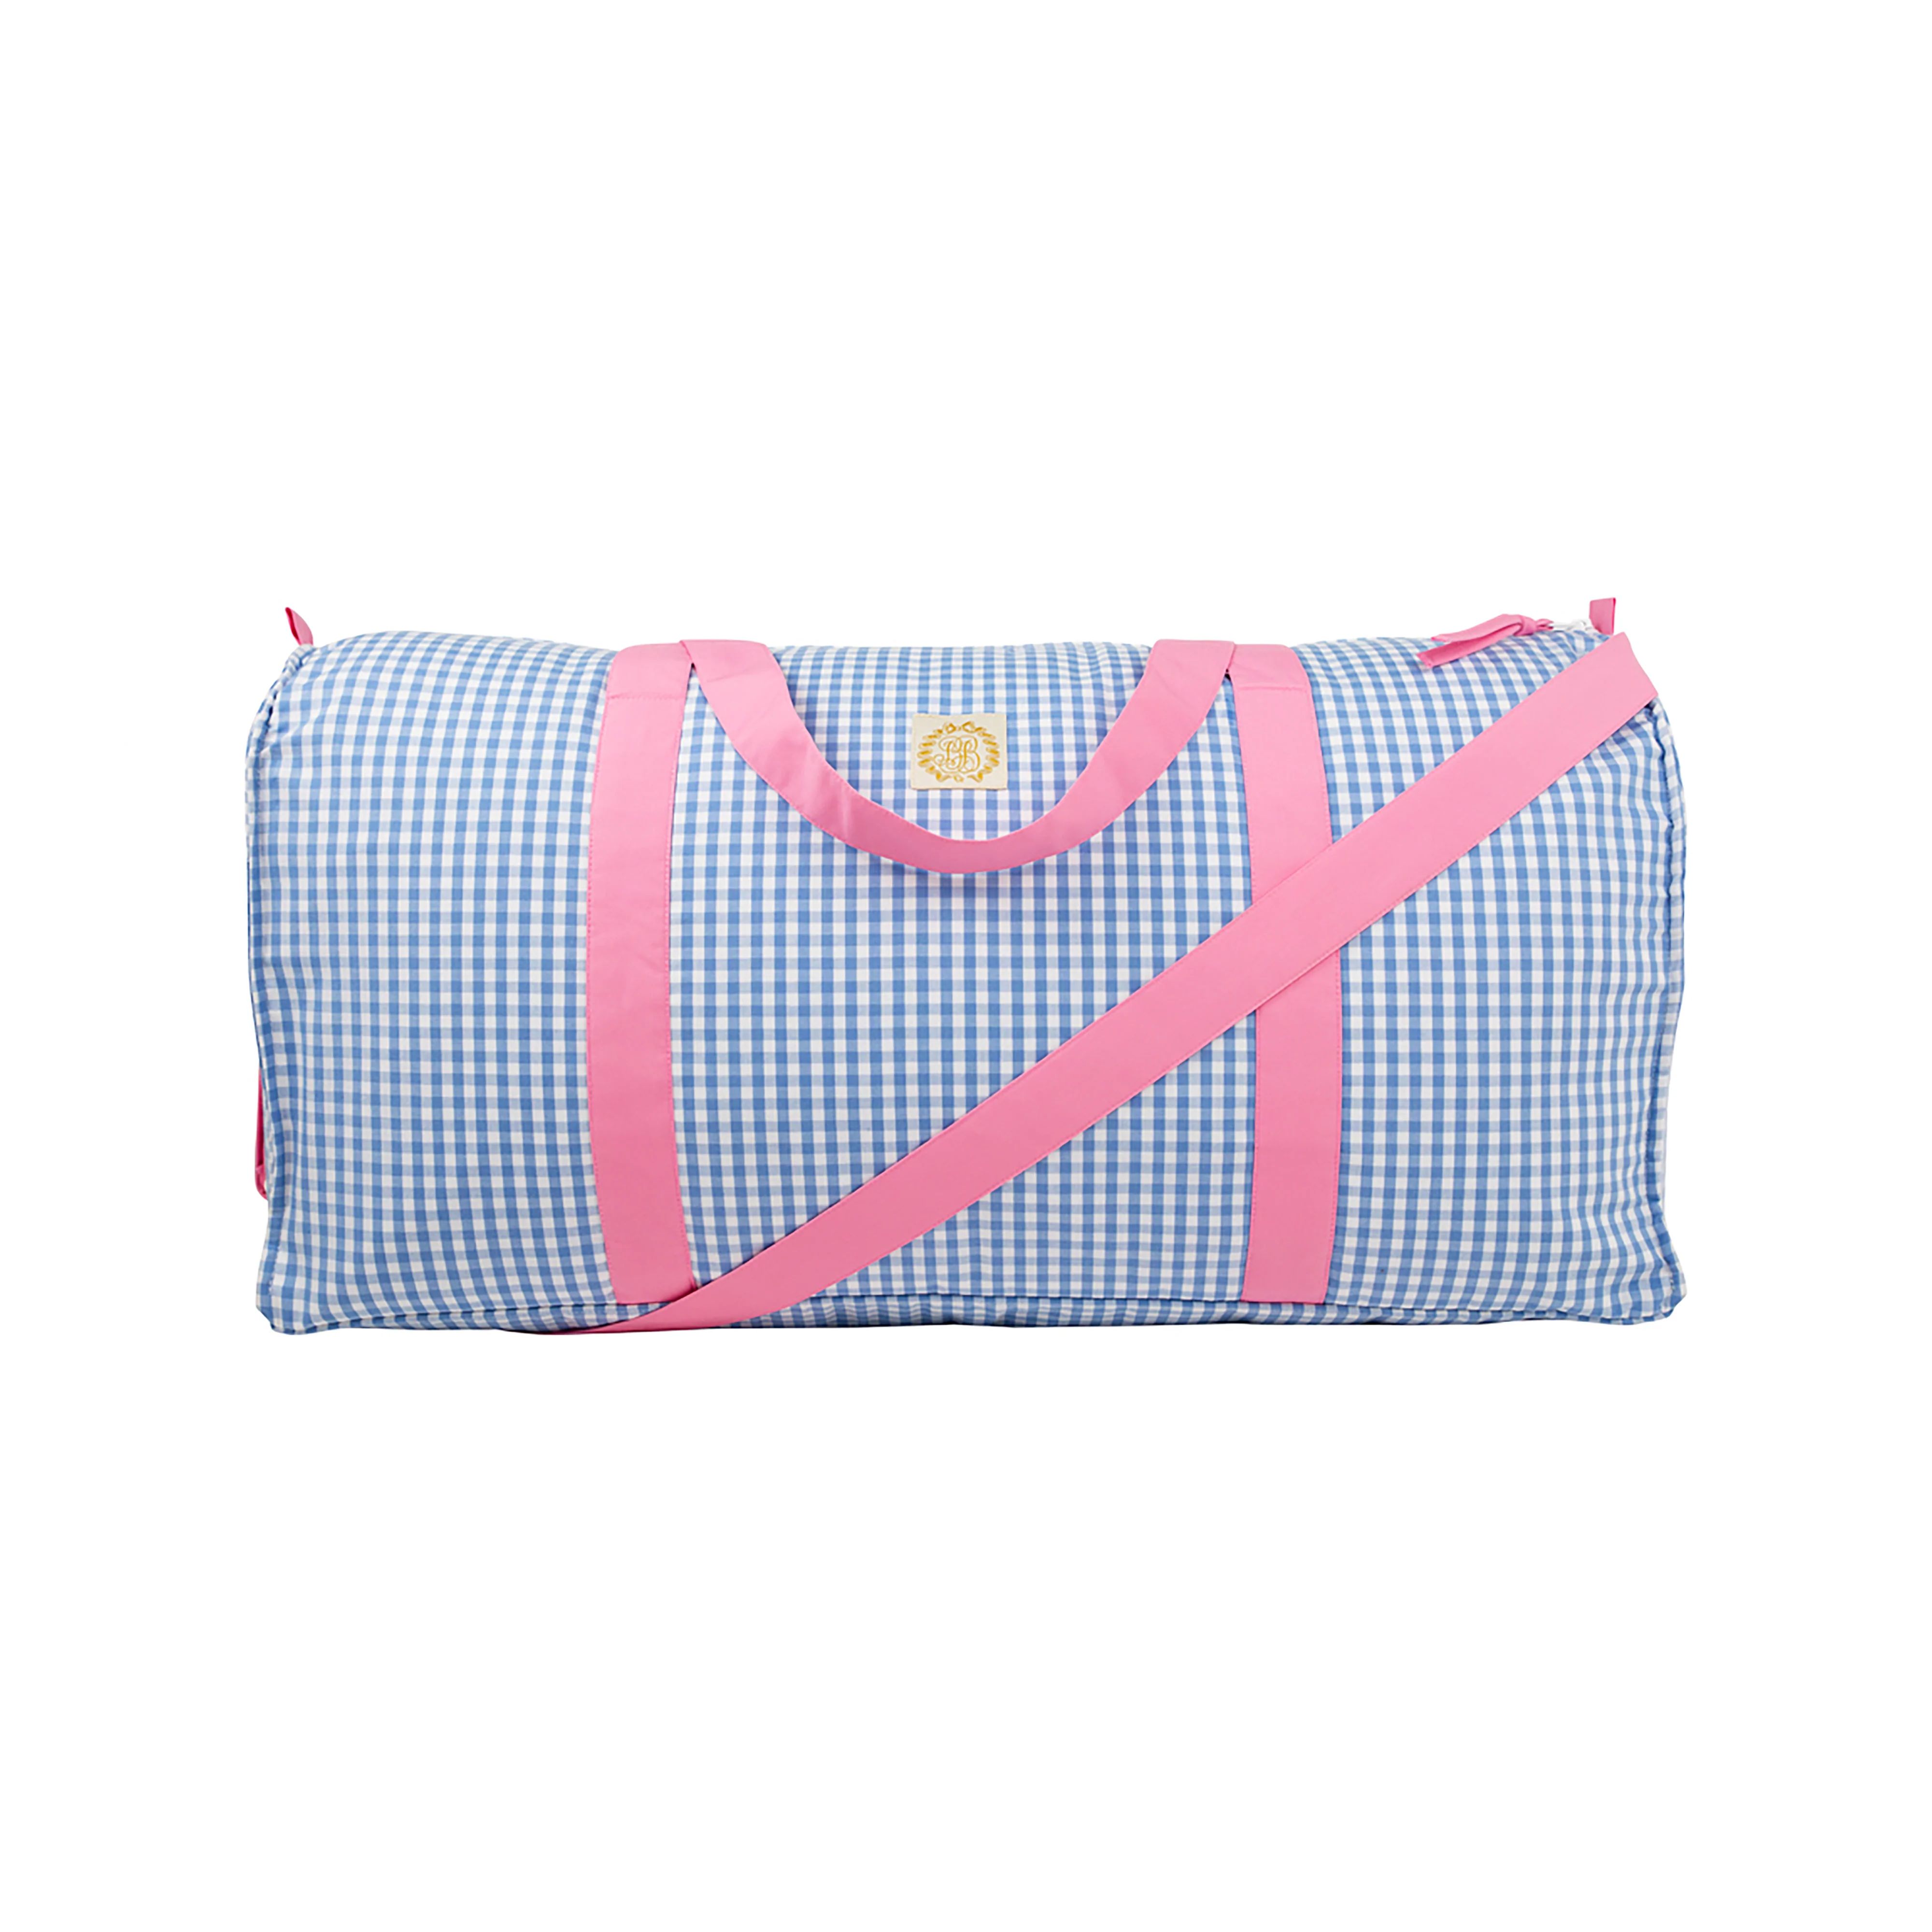 Logan's Long Weekend Bag - Park City Periwinkle Check with Hamptons Hot Pink | The Beaufort Bonnet Company